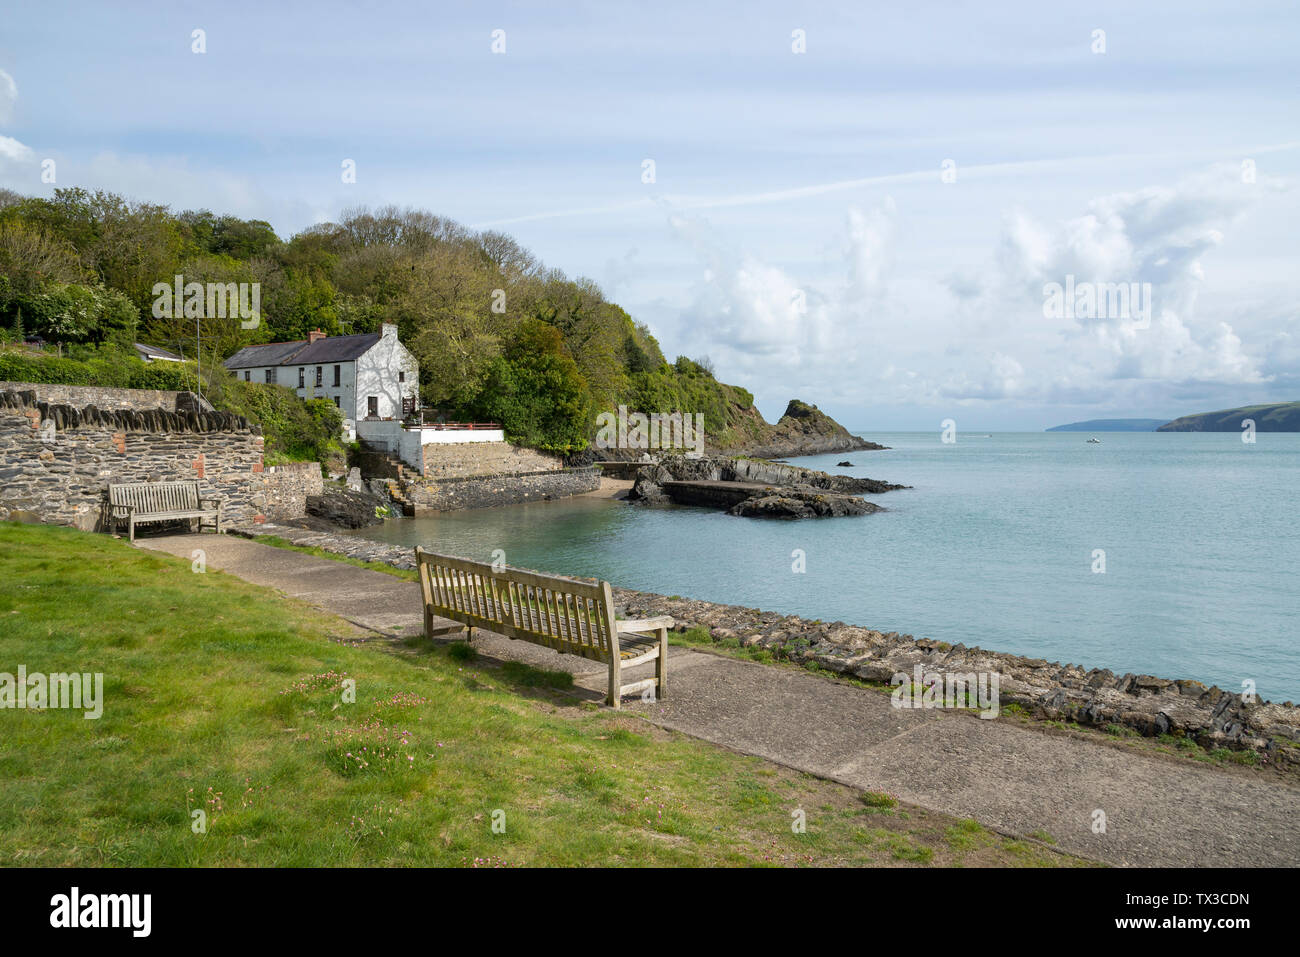 The hamlet of Cwm Yr Eglwys near Fishguard in the Pembrokeshire coast national park, Wales. Stock Photo